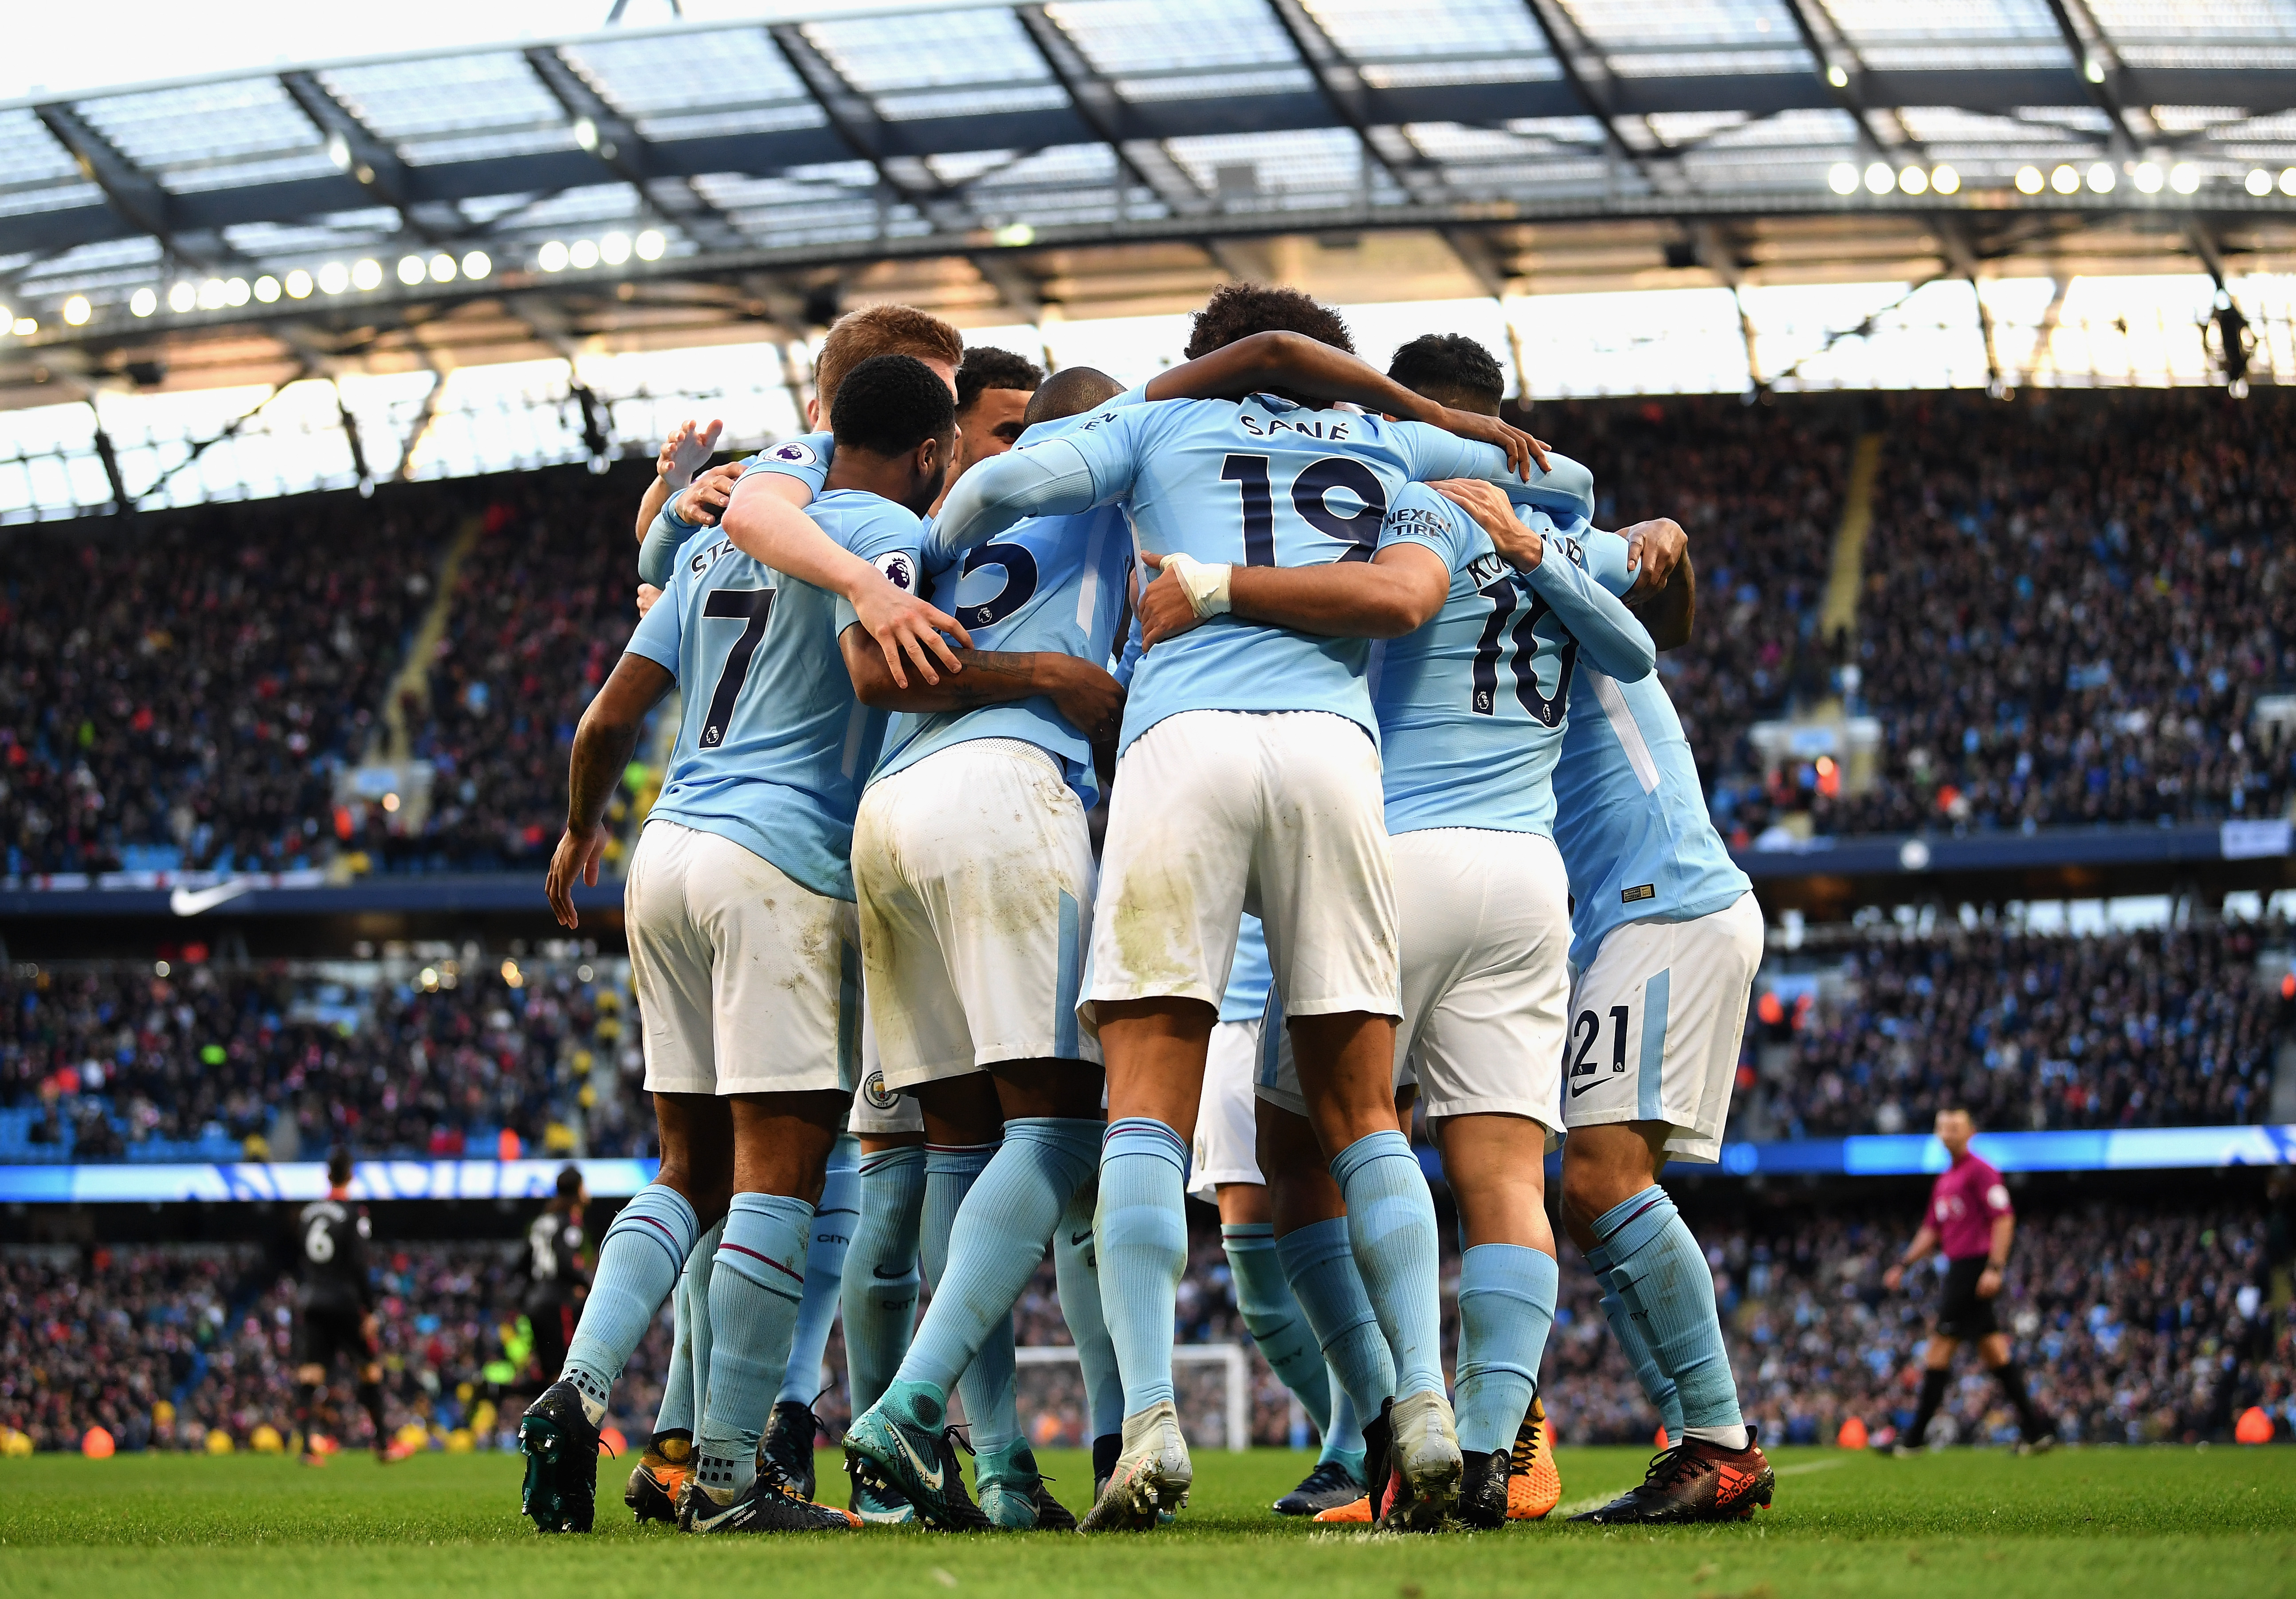 MANCHESTER, ENGLAND - NOVEMBER 05: Sergio Aguero of Manchester City celebrates scoring his sides second goal with his Manchester City team mates during the Premier League match between Manchester City and Arsenal at Etihad Stadium on November 5, 2017 in Manchester, England.  (Photo by Laurence Griffiths/Getty Images)